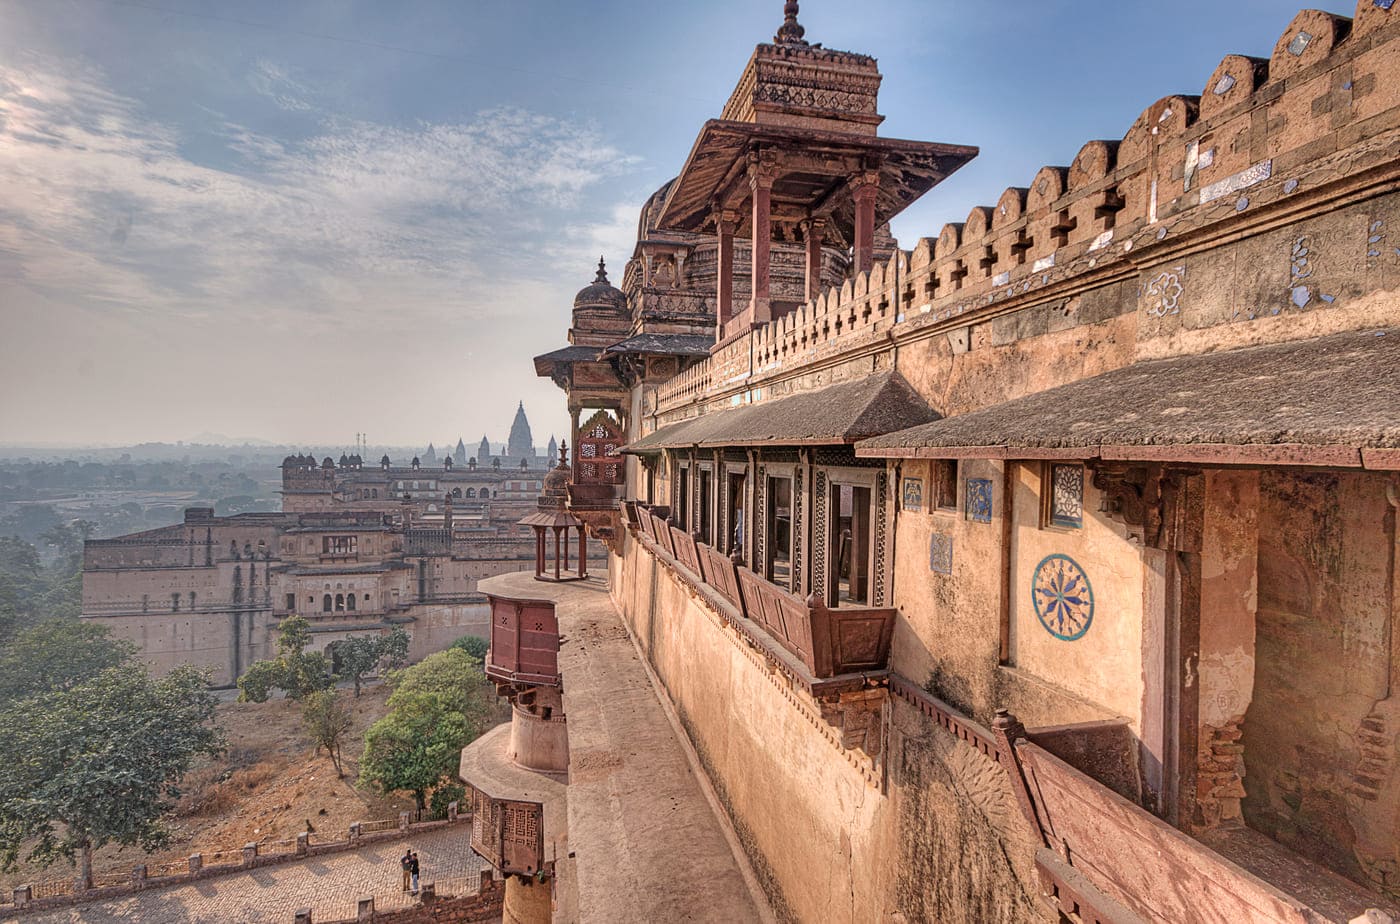 Jahangir Fort is a part of the much larger Orchha Fort complex, and was built by the Bundela king Bir Singh Deo in 1605 in honour of the Mughal emperor Jahangir 